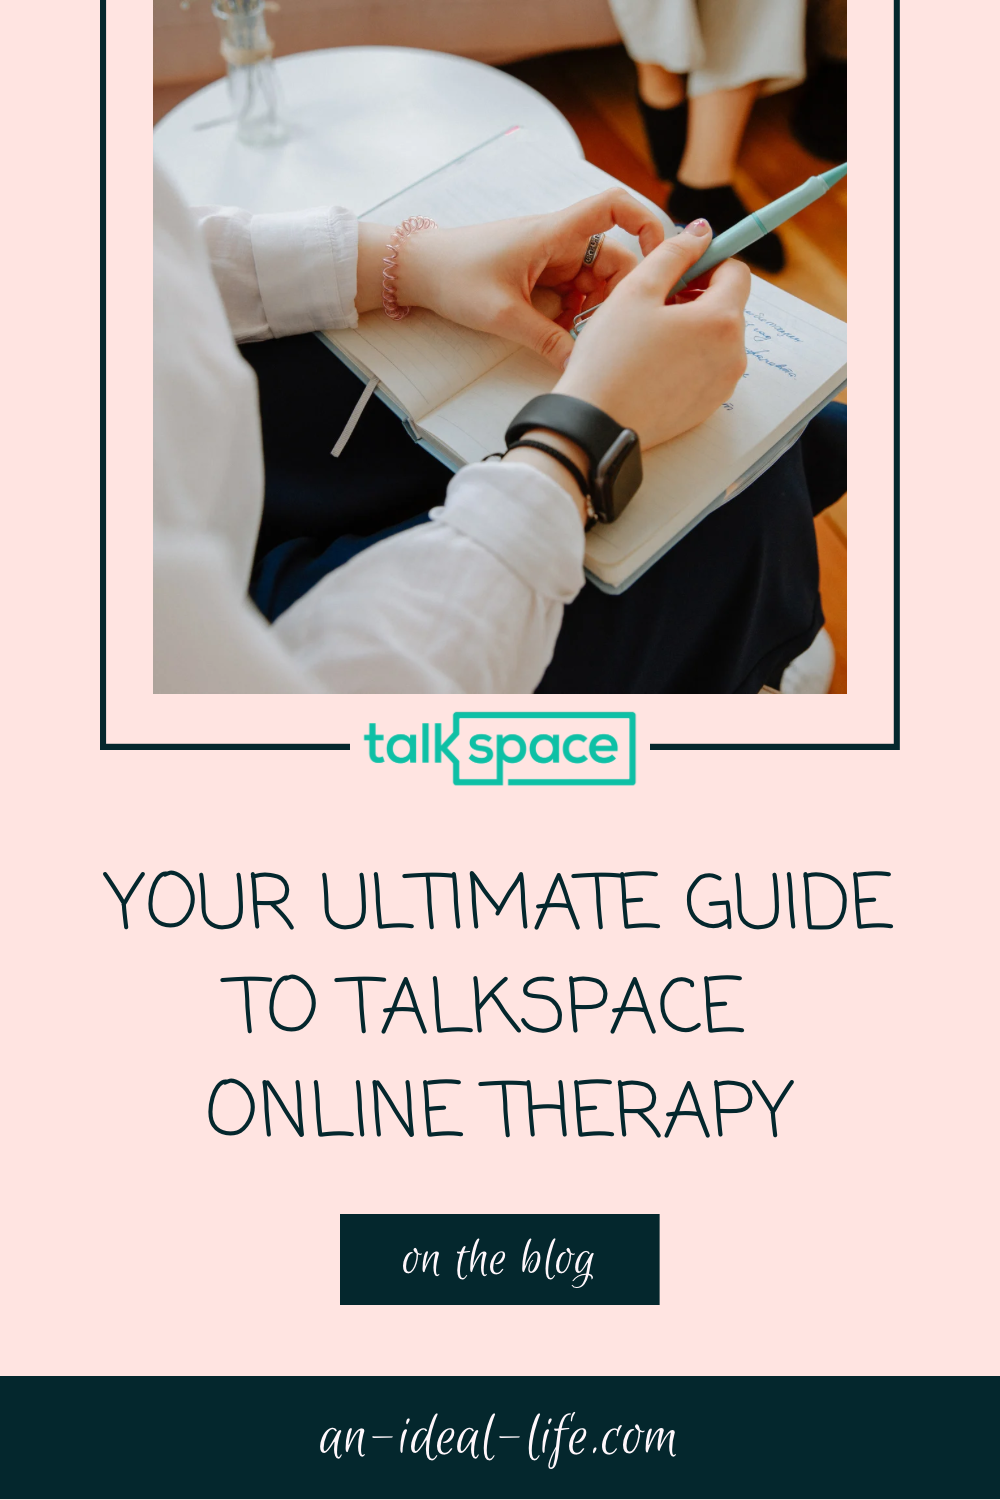 Your Ultimate Guide to Talkspace Online Therapy